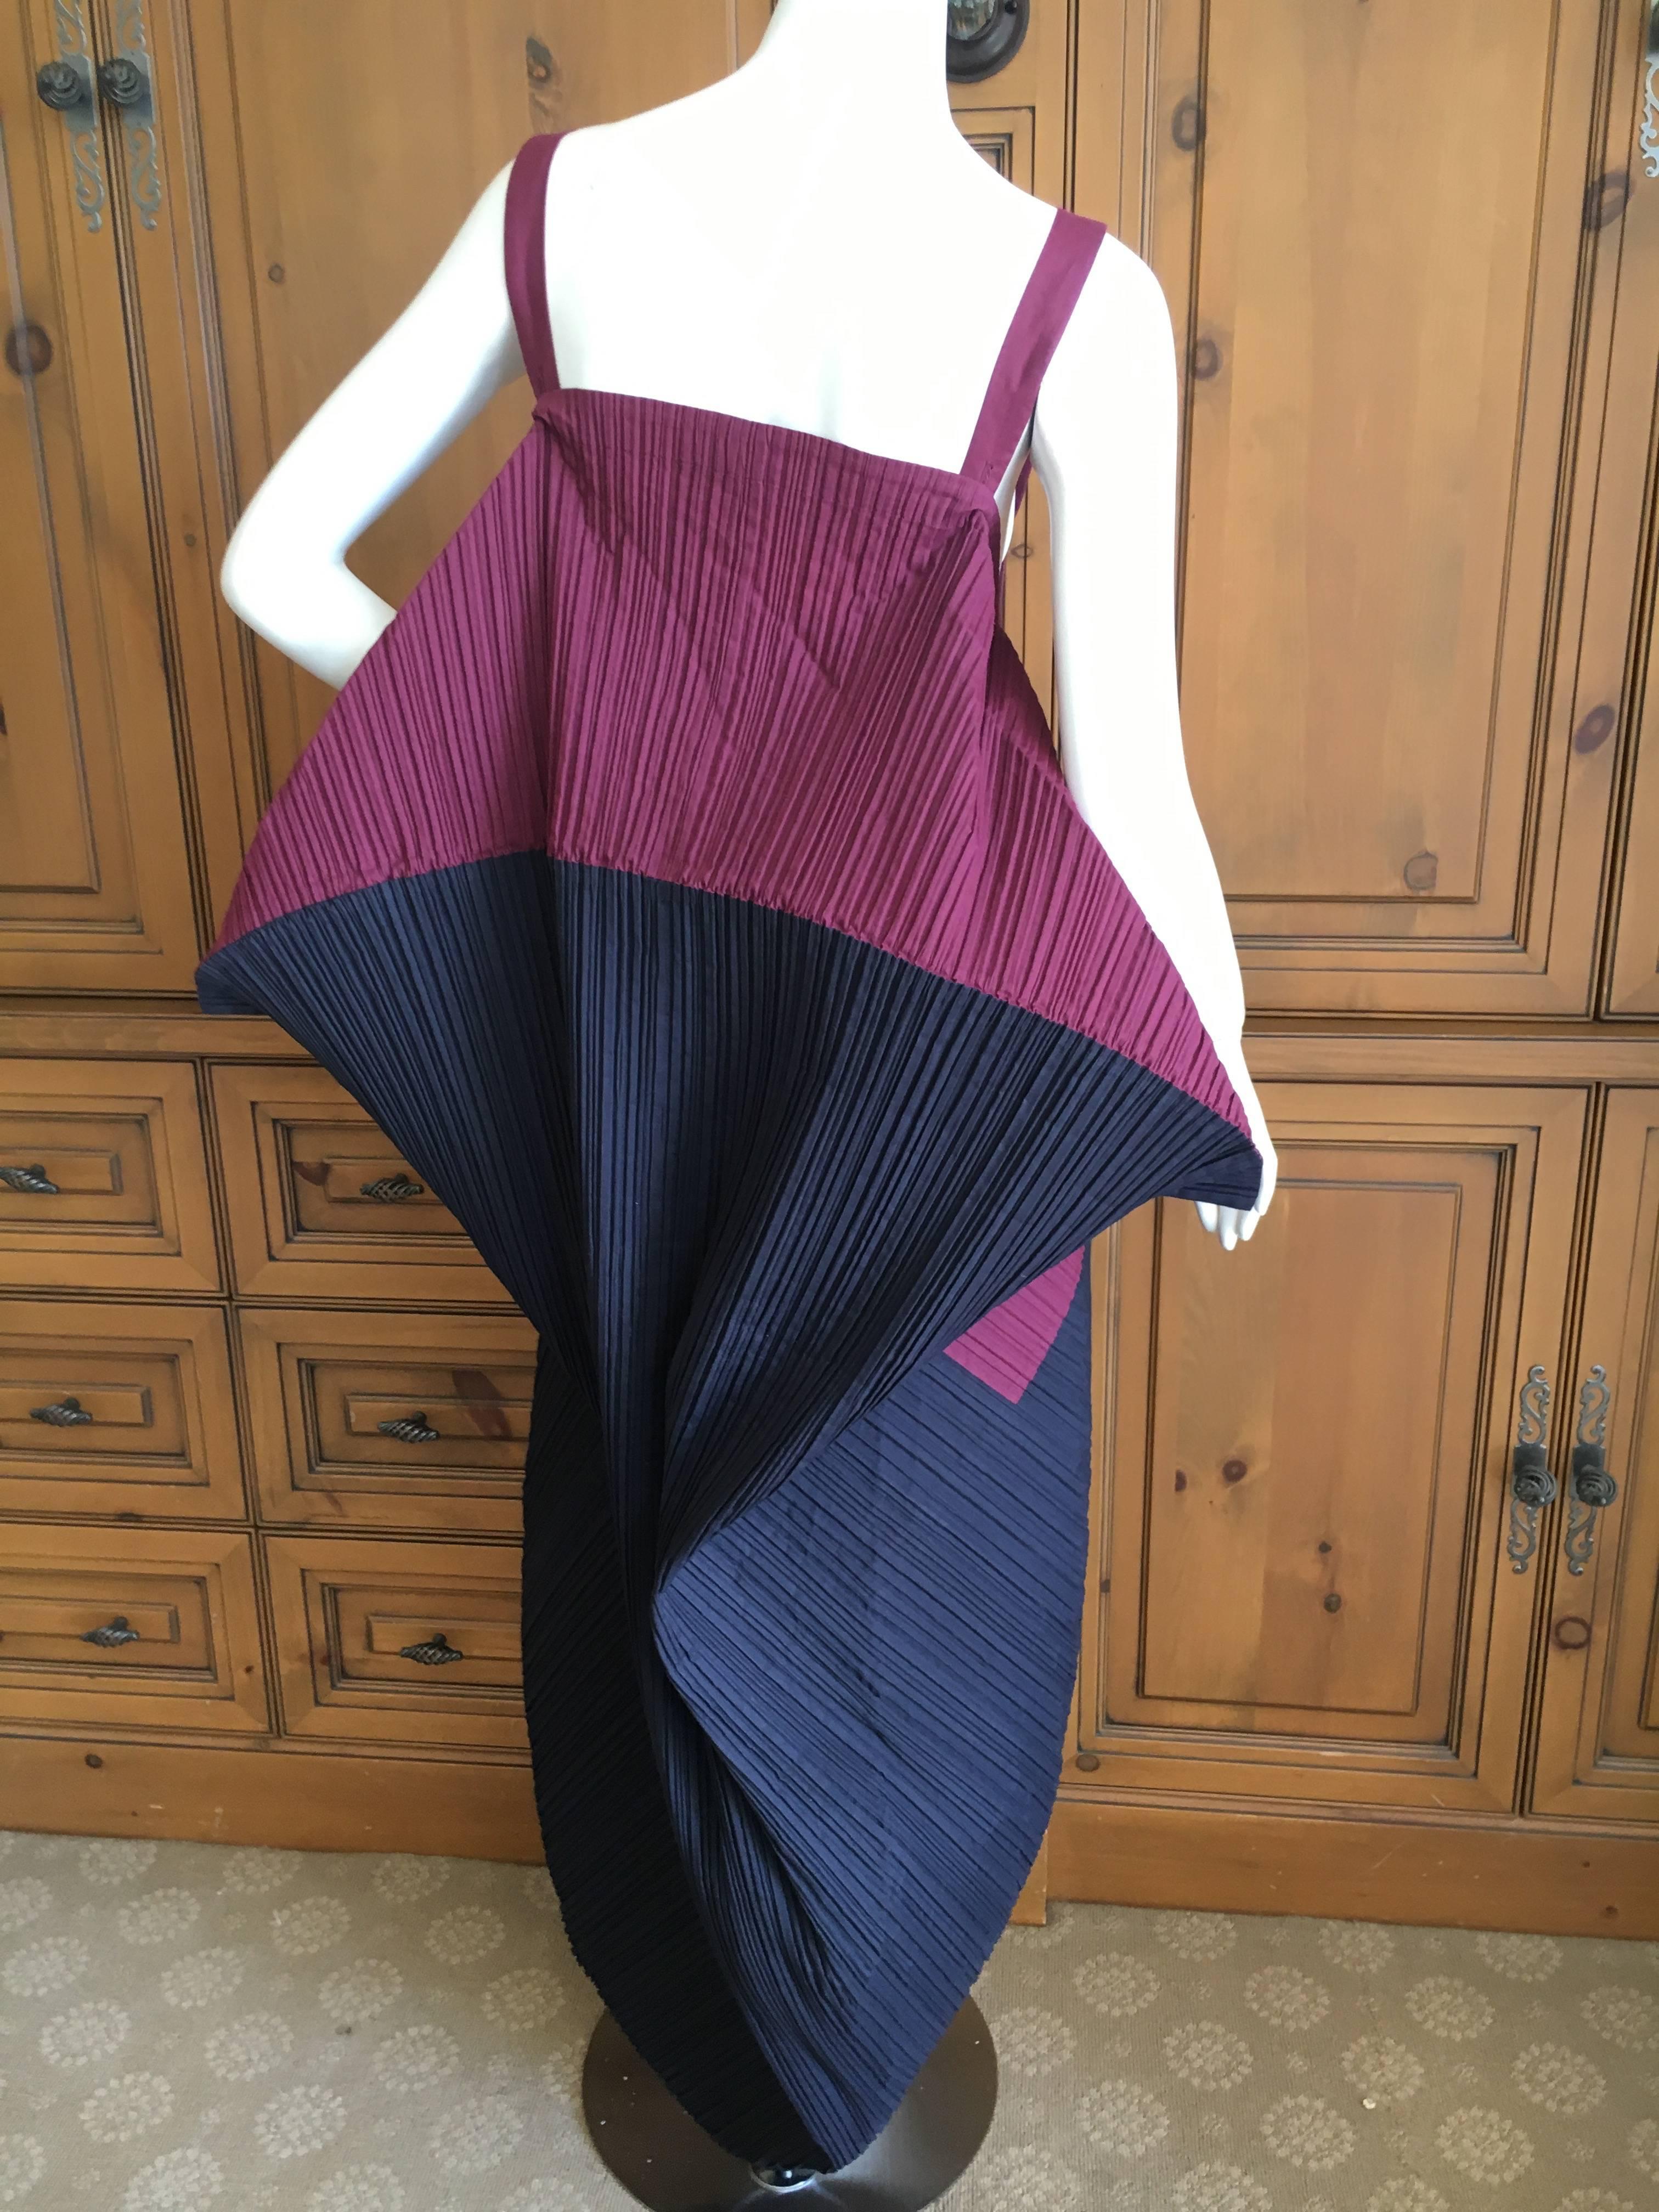 Issey Miyake for Bergdorf Goodman 1990 Colorblock Pleated Bubble Dress.
This forms a full circle, hard to photograph.
Size M
Length 53"